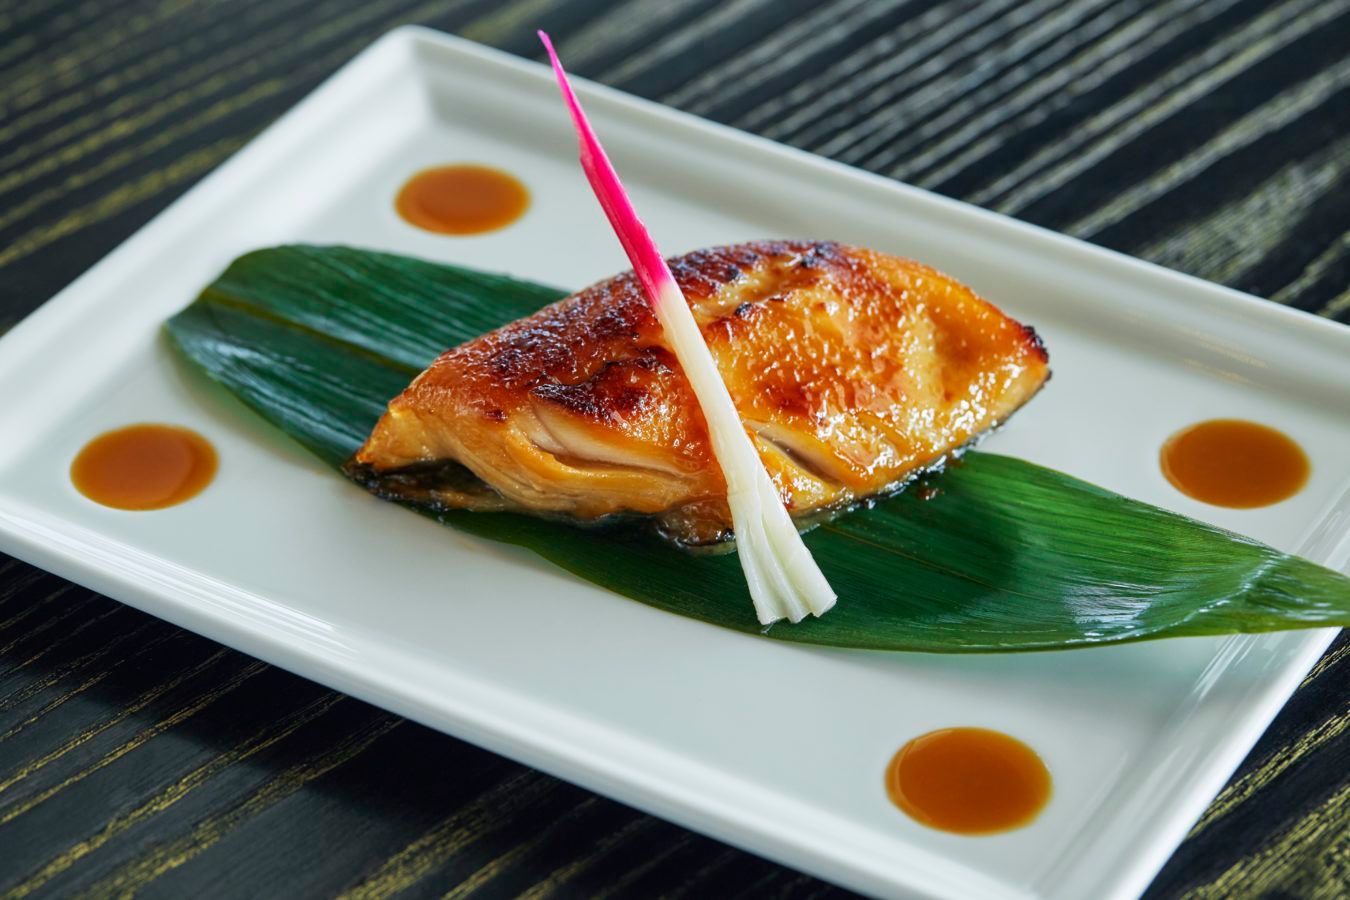 Here’s what to expect when Nobu Singapore opens on 1 June